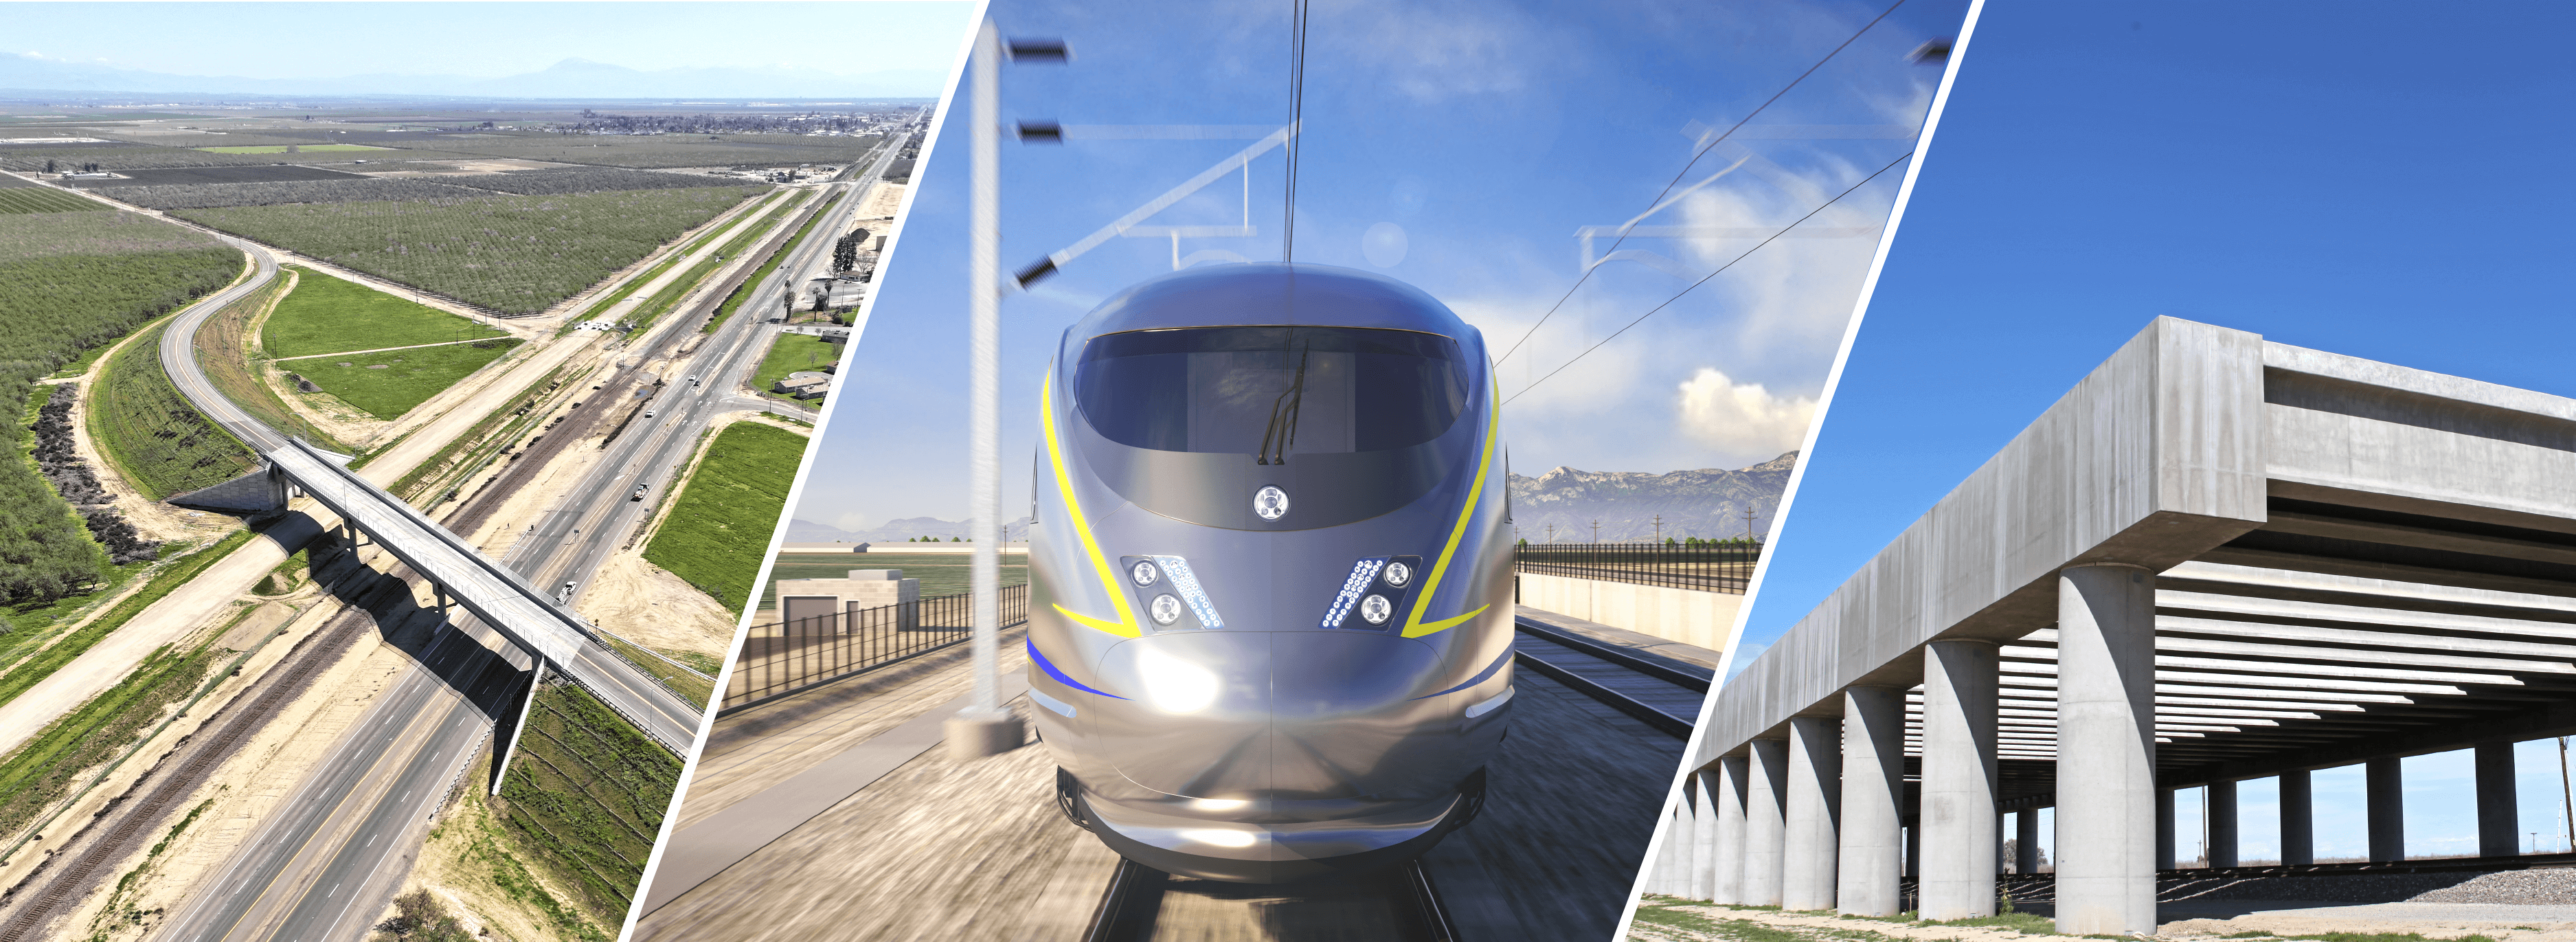 images of construction and train rendering within 2022 numbers